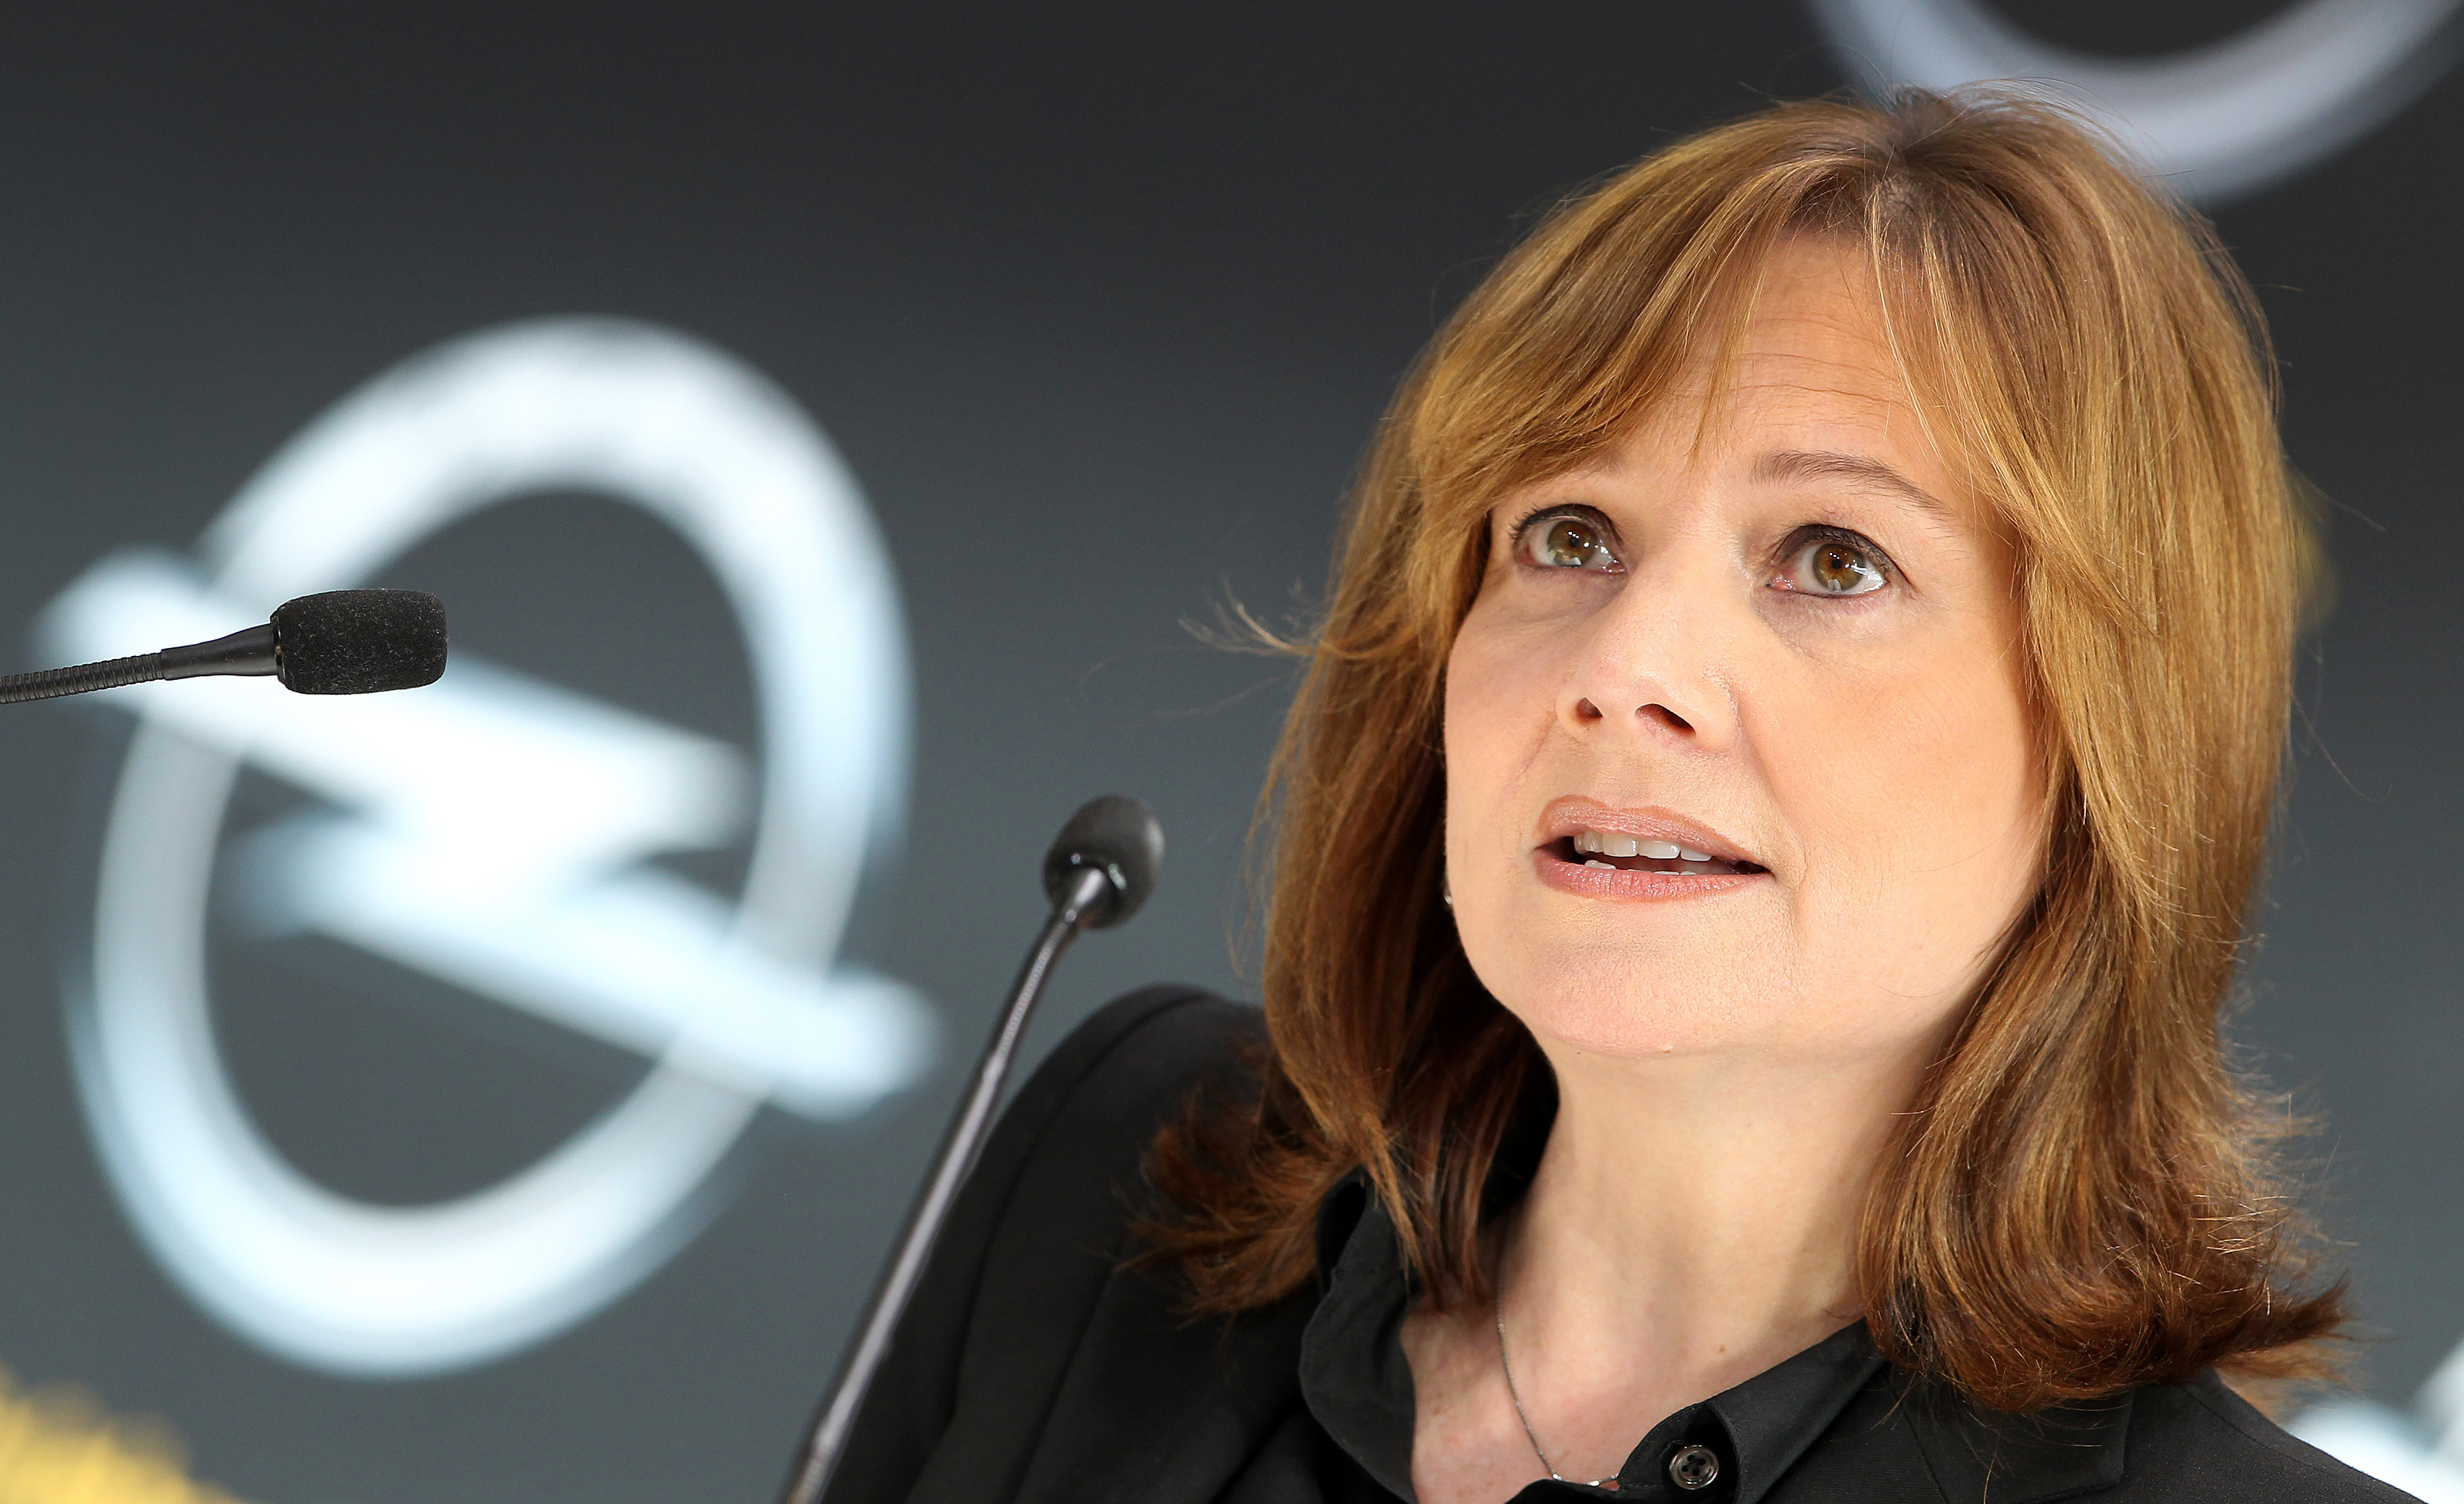 Mary Barra, a new CEO of U.S. carmaker General Motors GM addresses the media during a news conference at the headquarters of the company's German subsidiary Opel in Ruesselsheim, on January 27, 2014. (Daniel Roland&mdash;AFP/Getty Images)